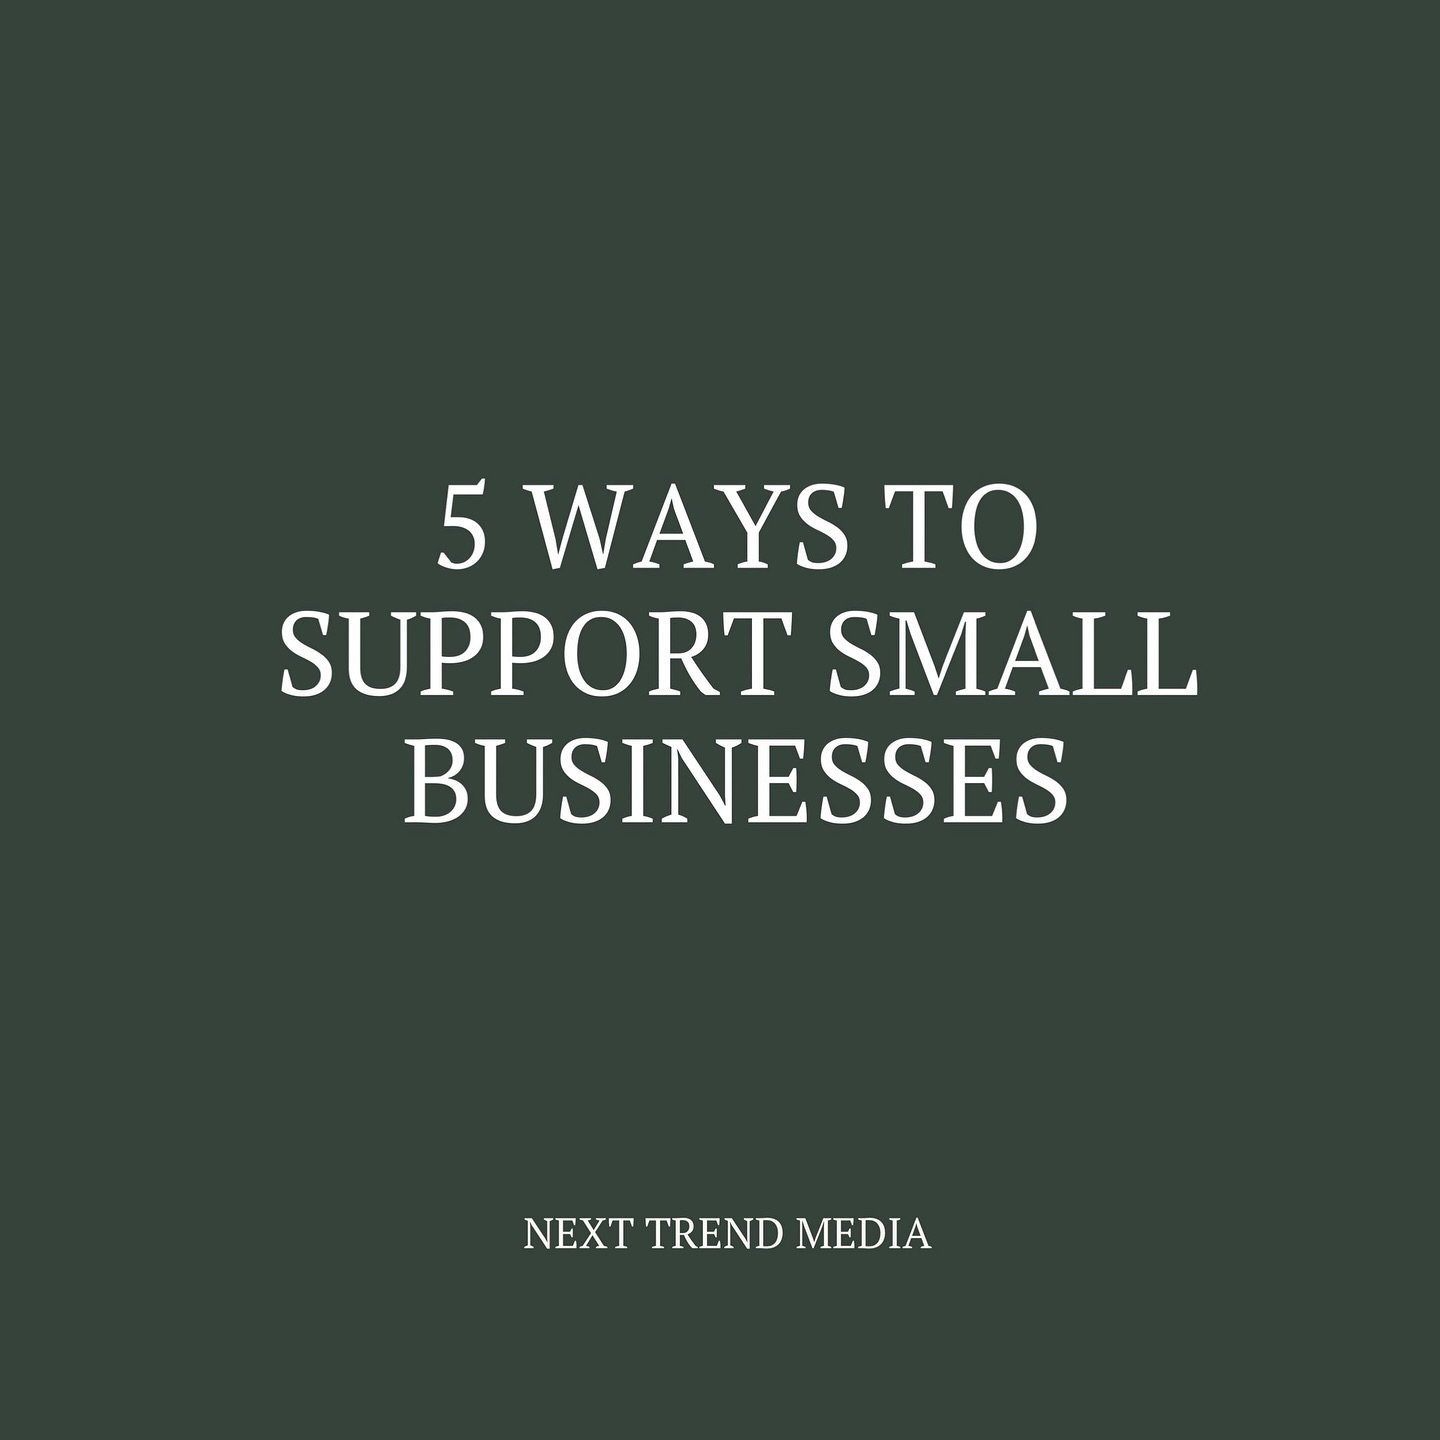 Boost your community while saving money! 

✖️ Here are 5 cost-effective ways to support local businesses: 

1. Shop at farmer&rsquo;s markets for fresh produce. 

2. Attend local events and festivals. 

3. Leave positive reviews online. 

4. Share th